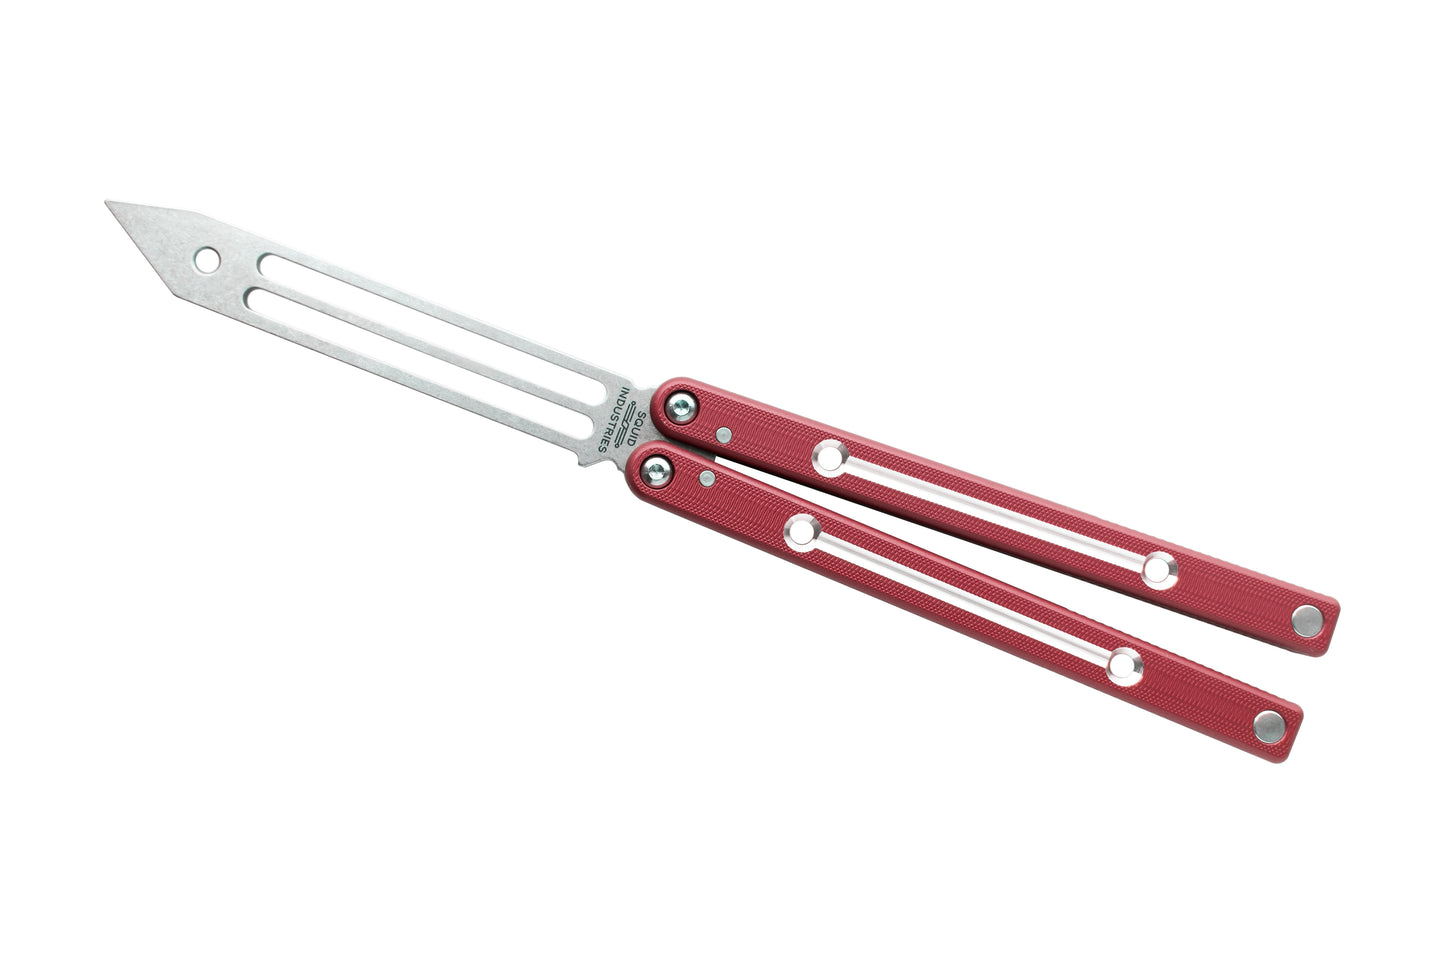 Dual-Tone Red Clearance Blemished Squidtrainer V4 Balisong Butterfly Knife Trainer 